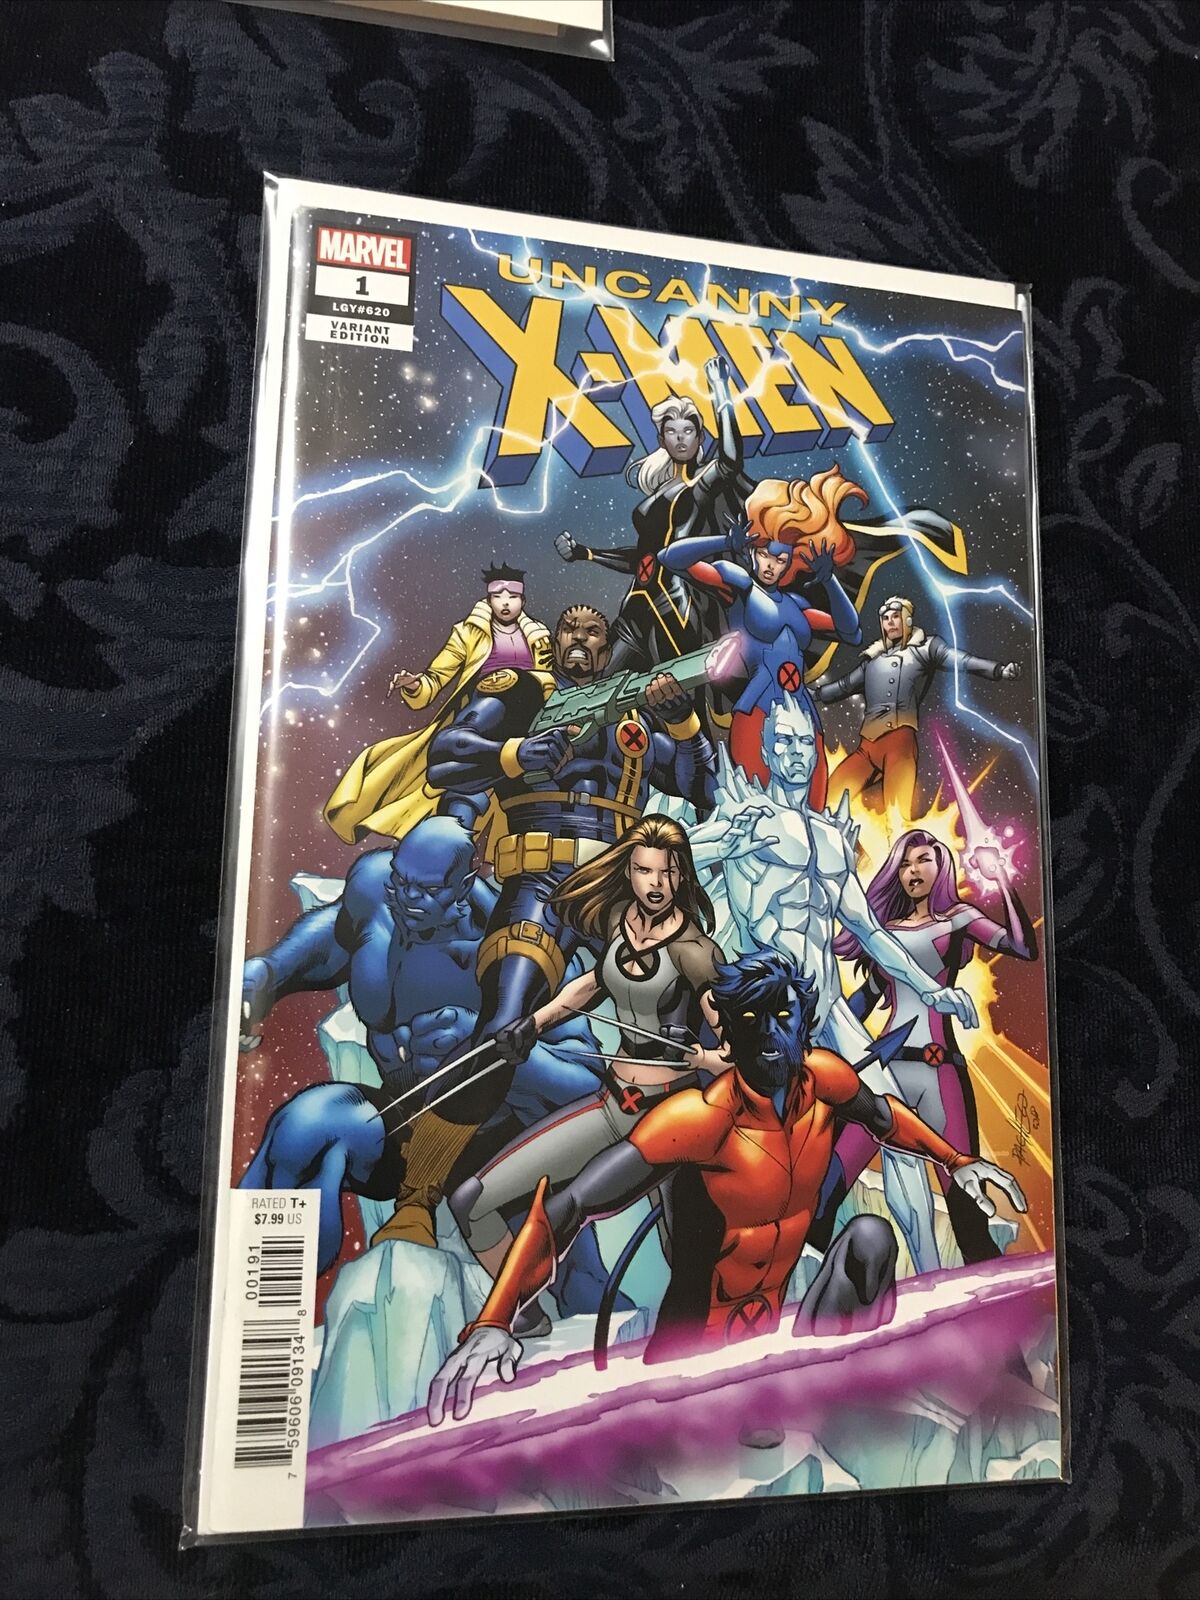 Uncanny X-Men #1 (Marvel, January 2019) Carlos Pacheco 1:25 Variant Cover NM+